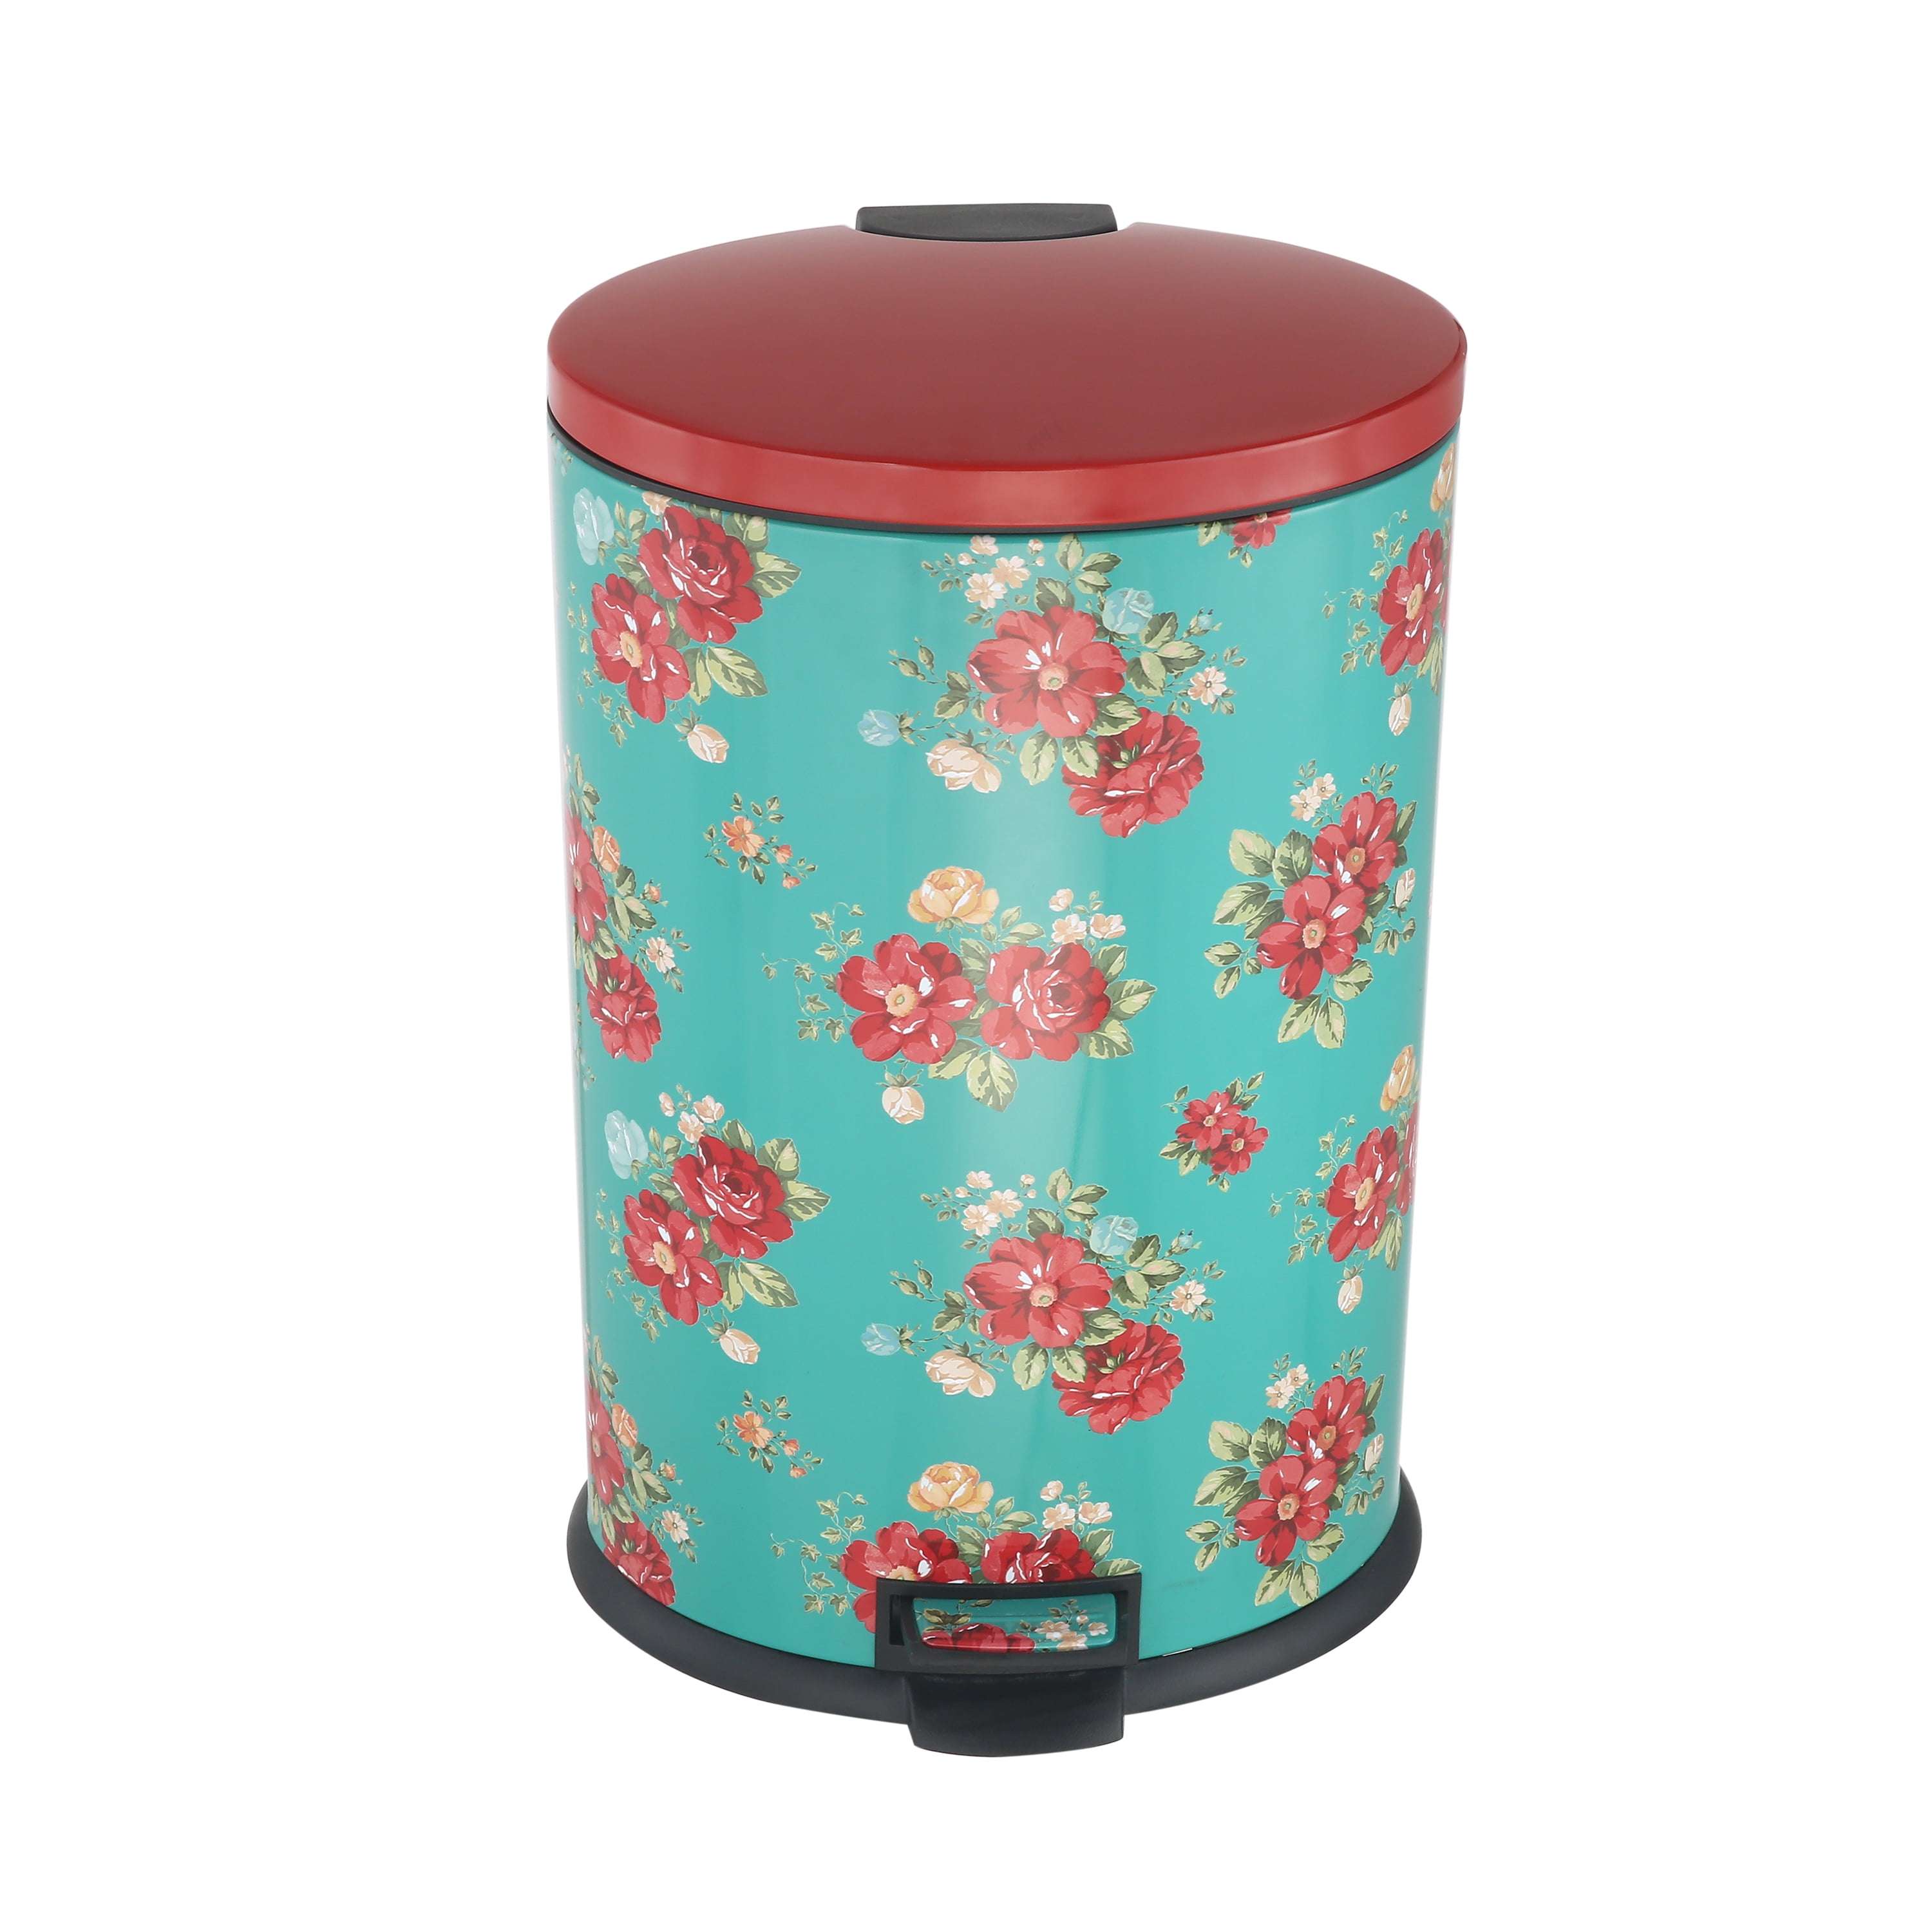 The Pioneer Woman Breezy Blossom 1.3 Gallon Stainless Steel Round